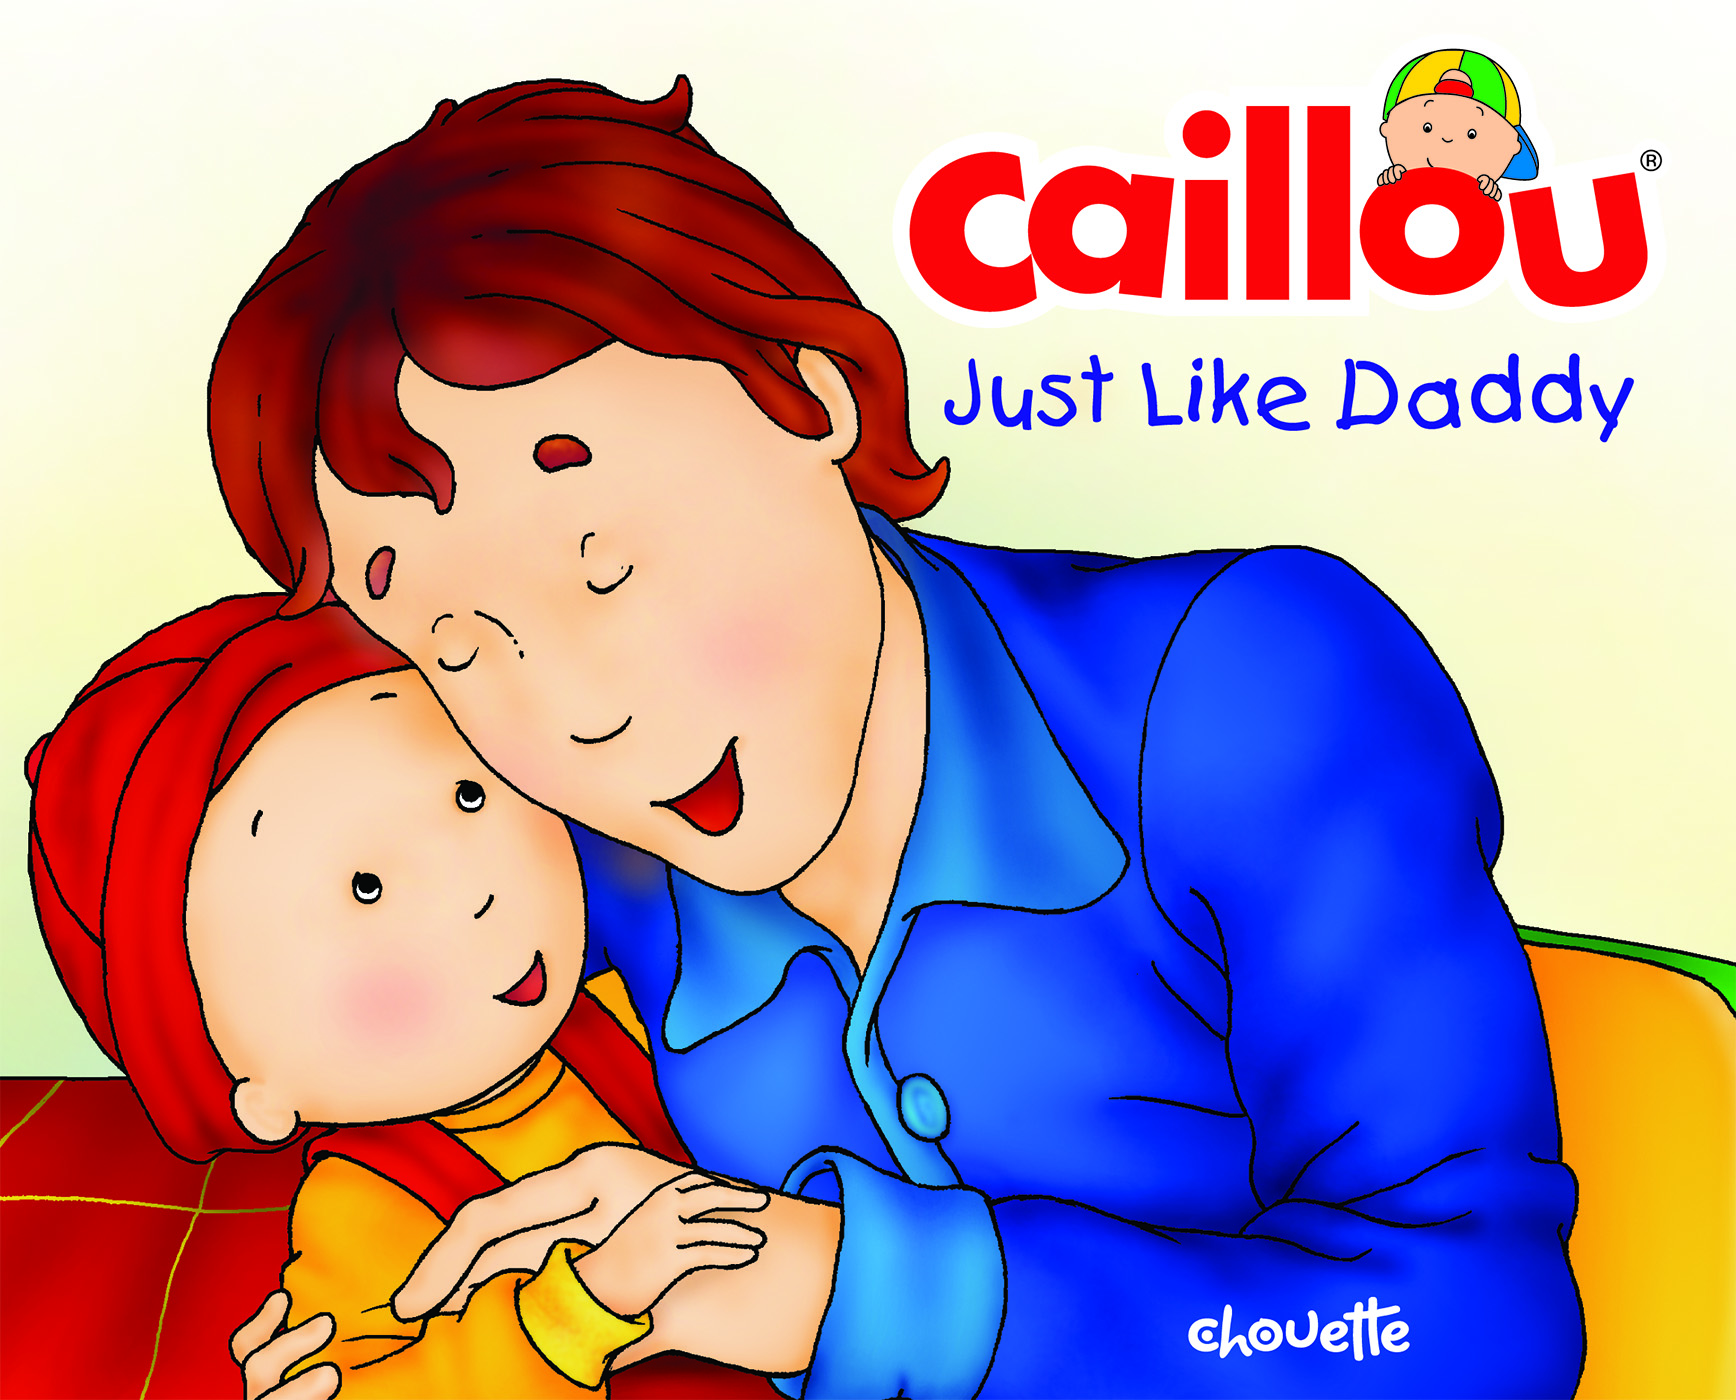 Caillou: Just Like Daddy.